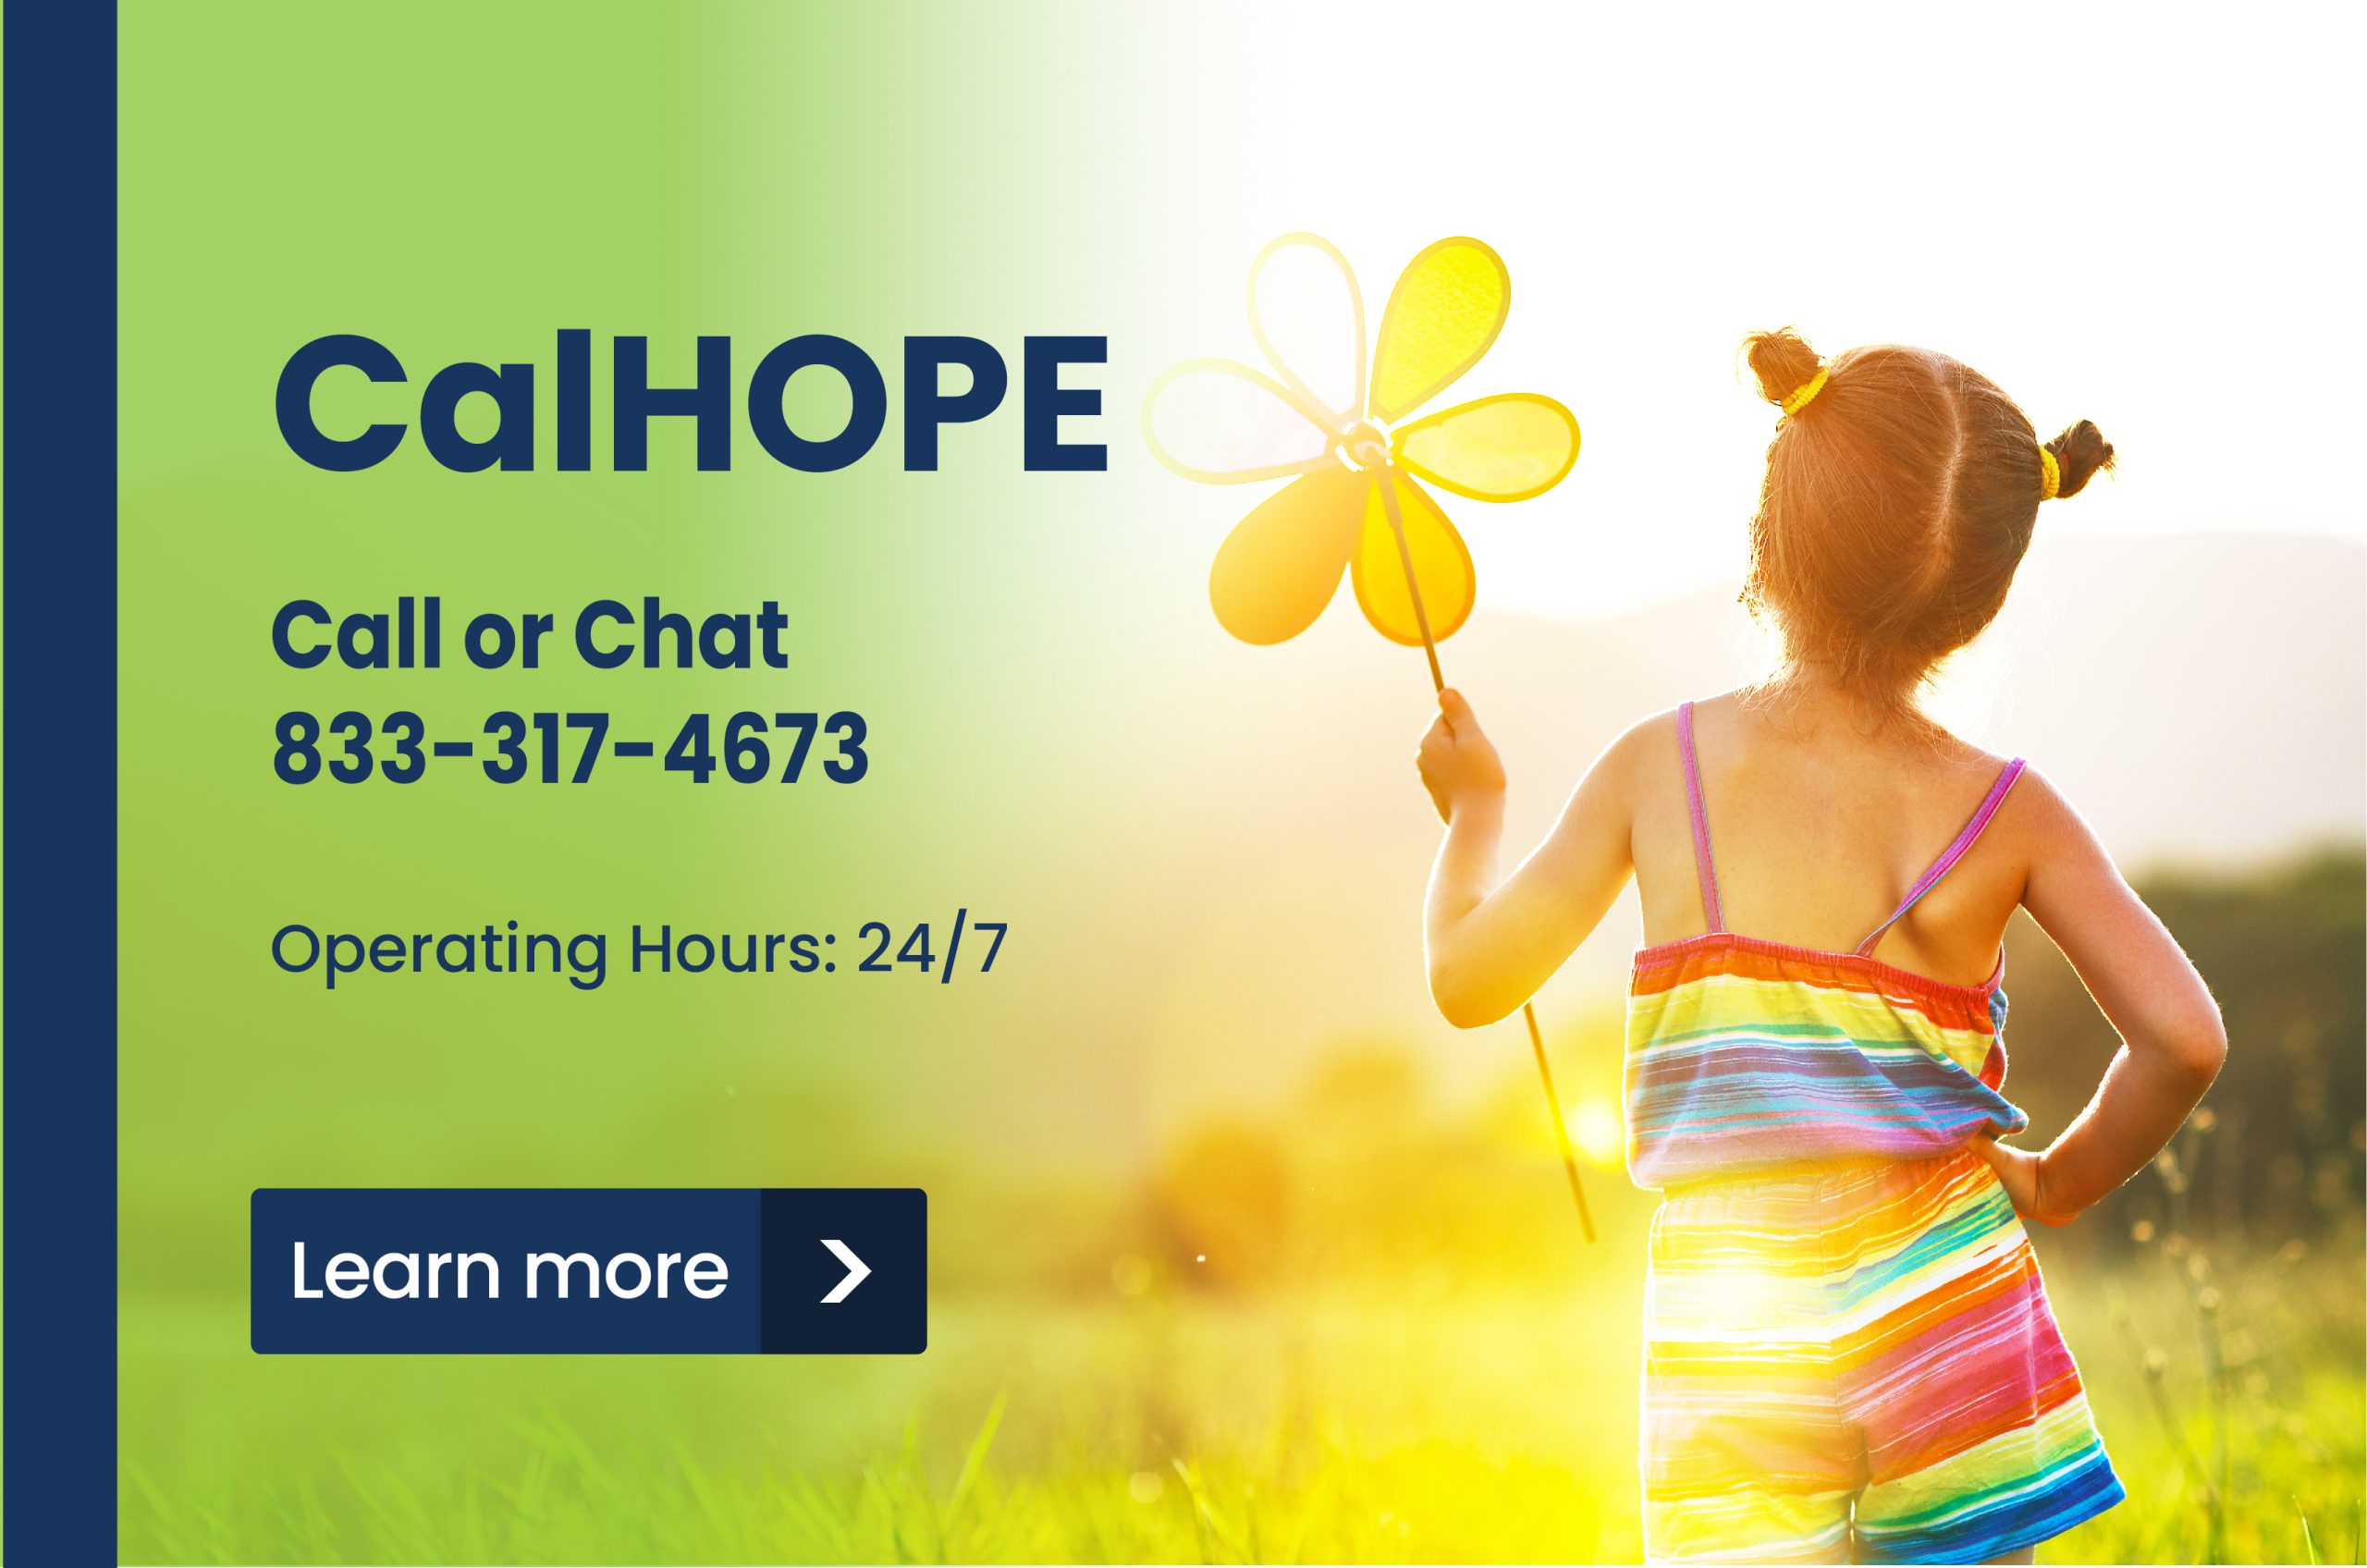 CalHope offers safe, secure, and culturally sensitive emotional support for all Californians who have experienced emotional challenges triggered by the COVID-19 pandemic.